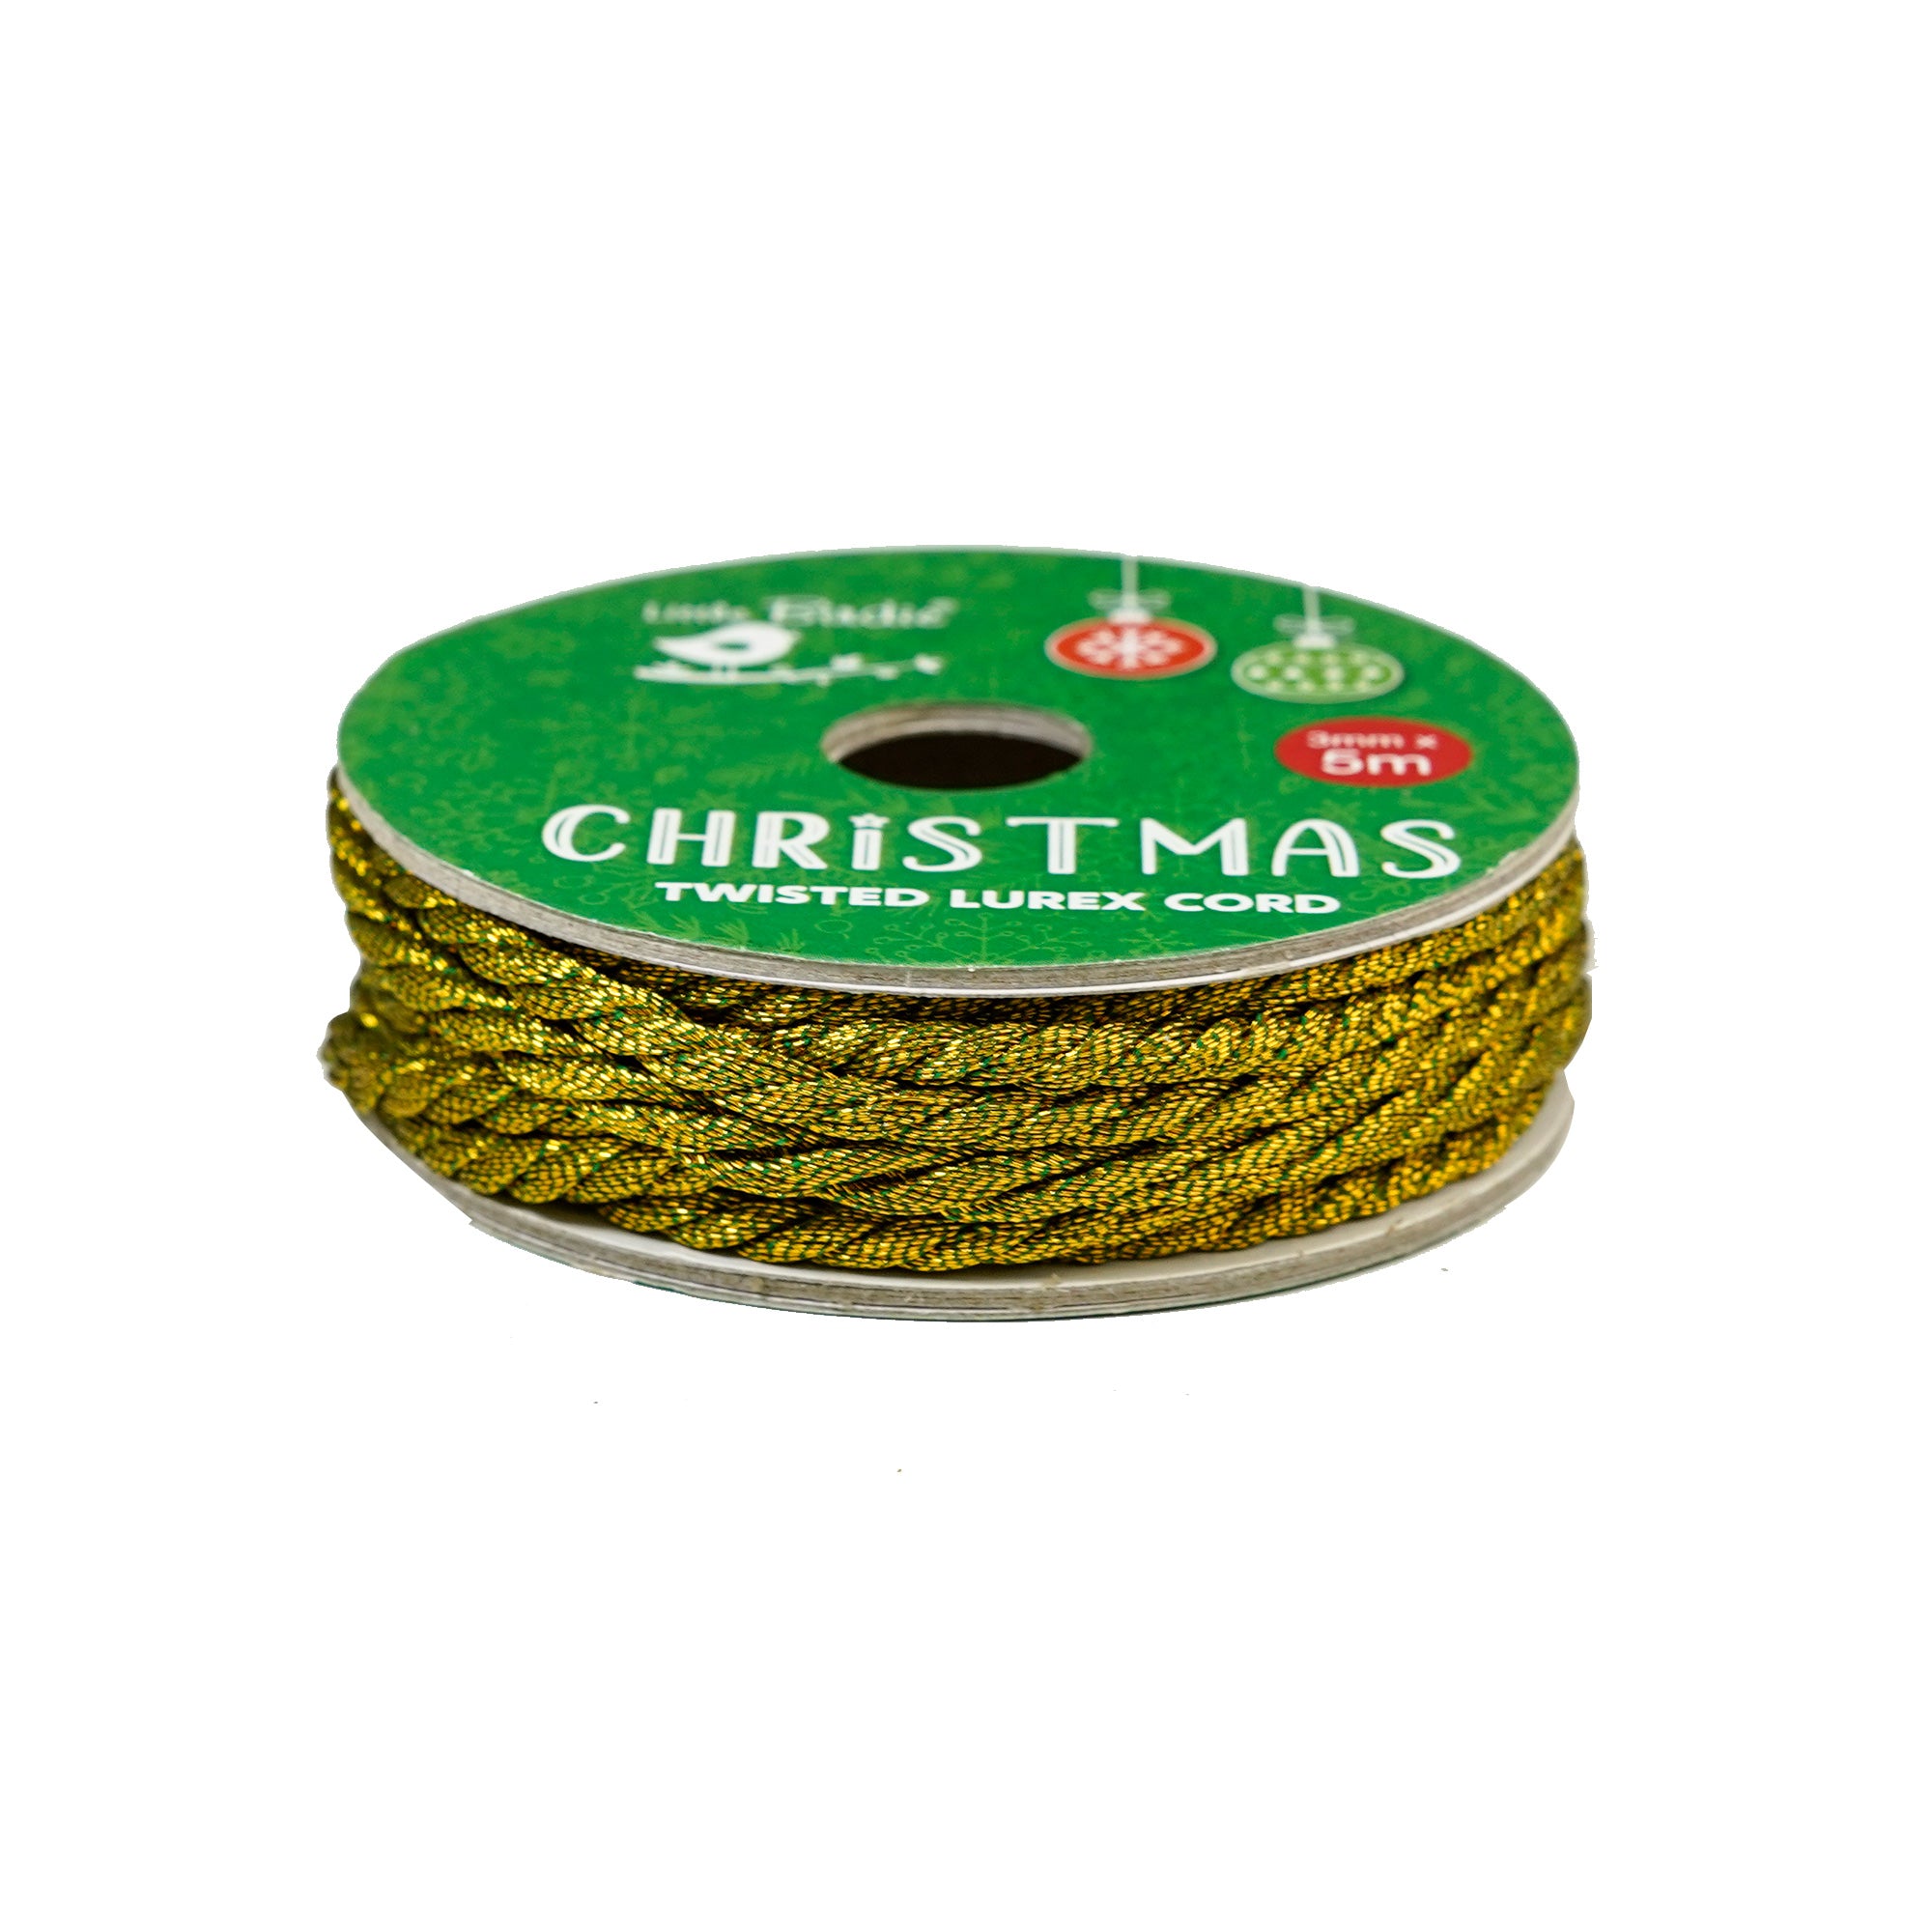 Christmas Twisted Lurex Cord 3ply - Green 5mm, 5mtr Roll